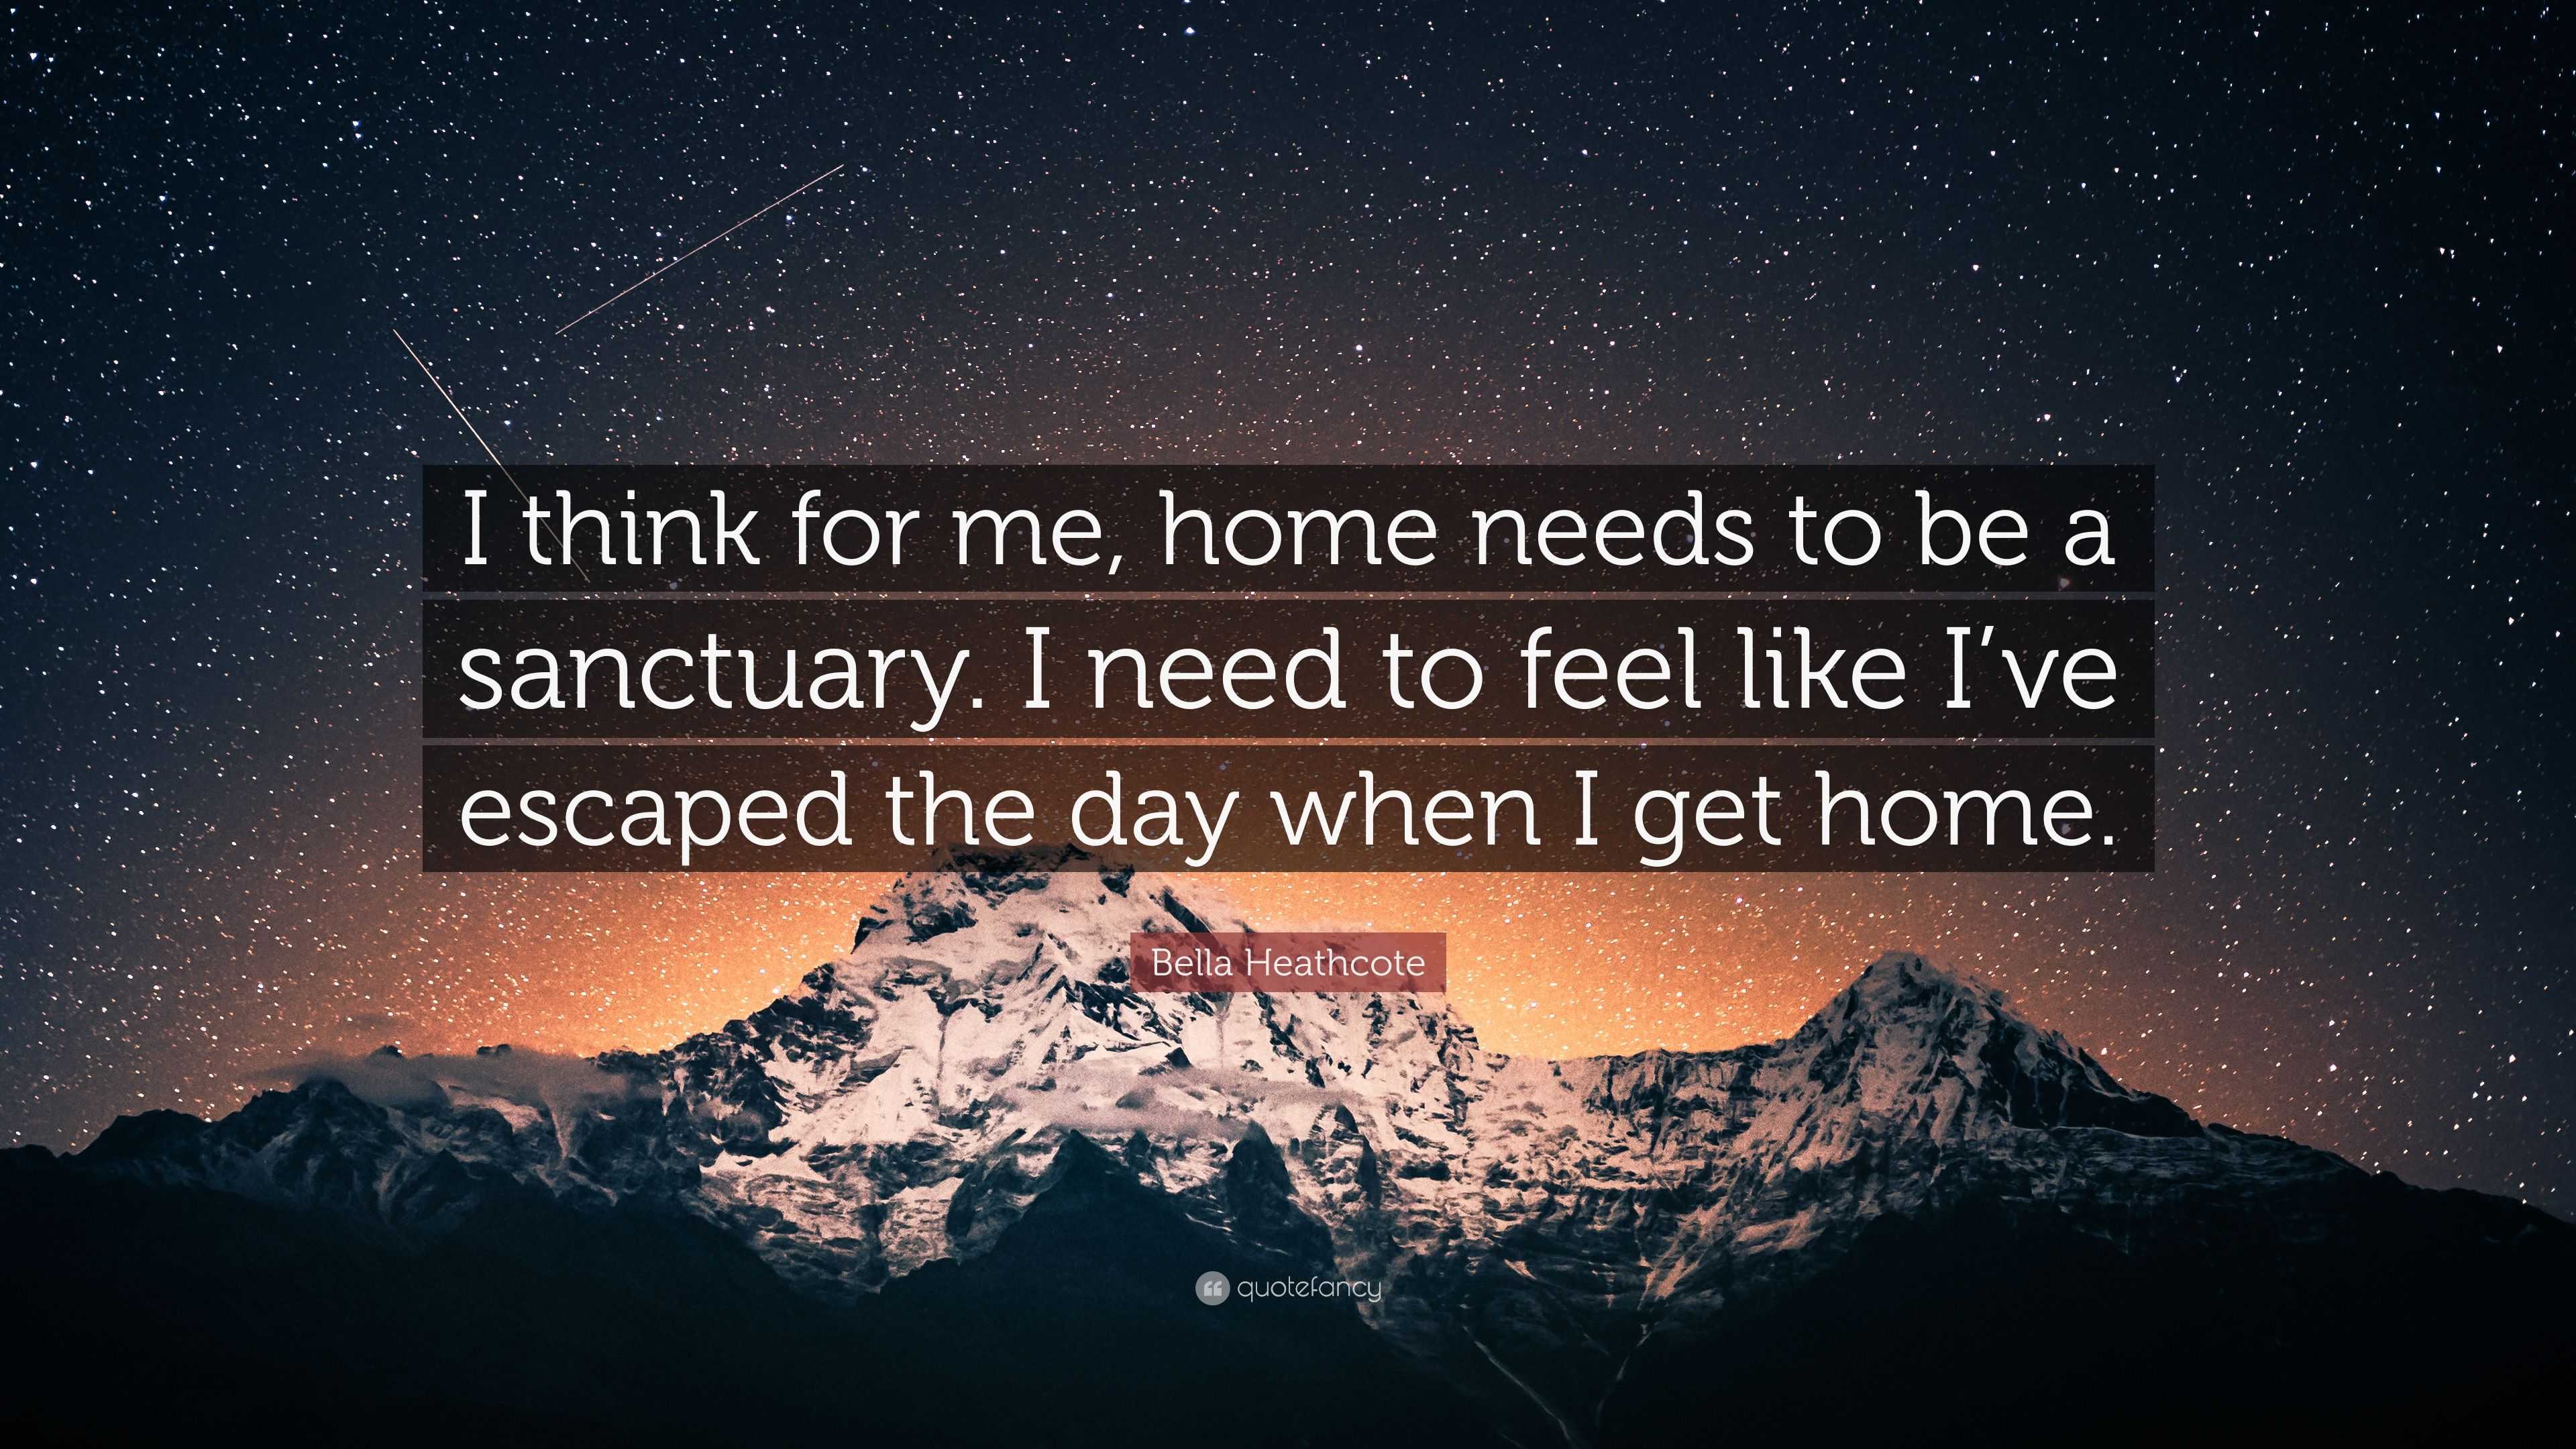 Bella Heathcote Quote: “I think for me, home needs to be a sanctuary. I  need to